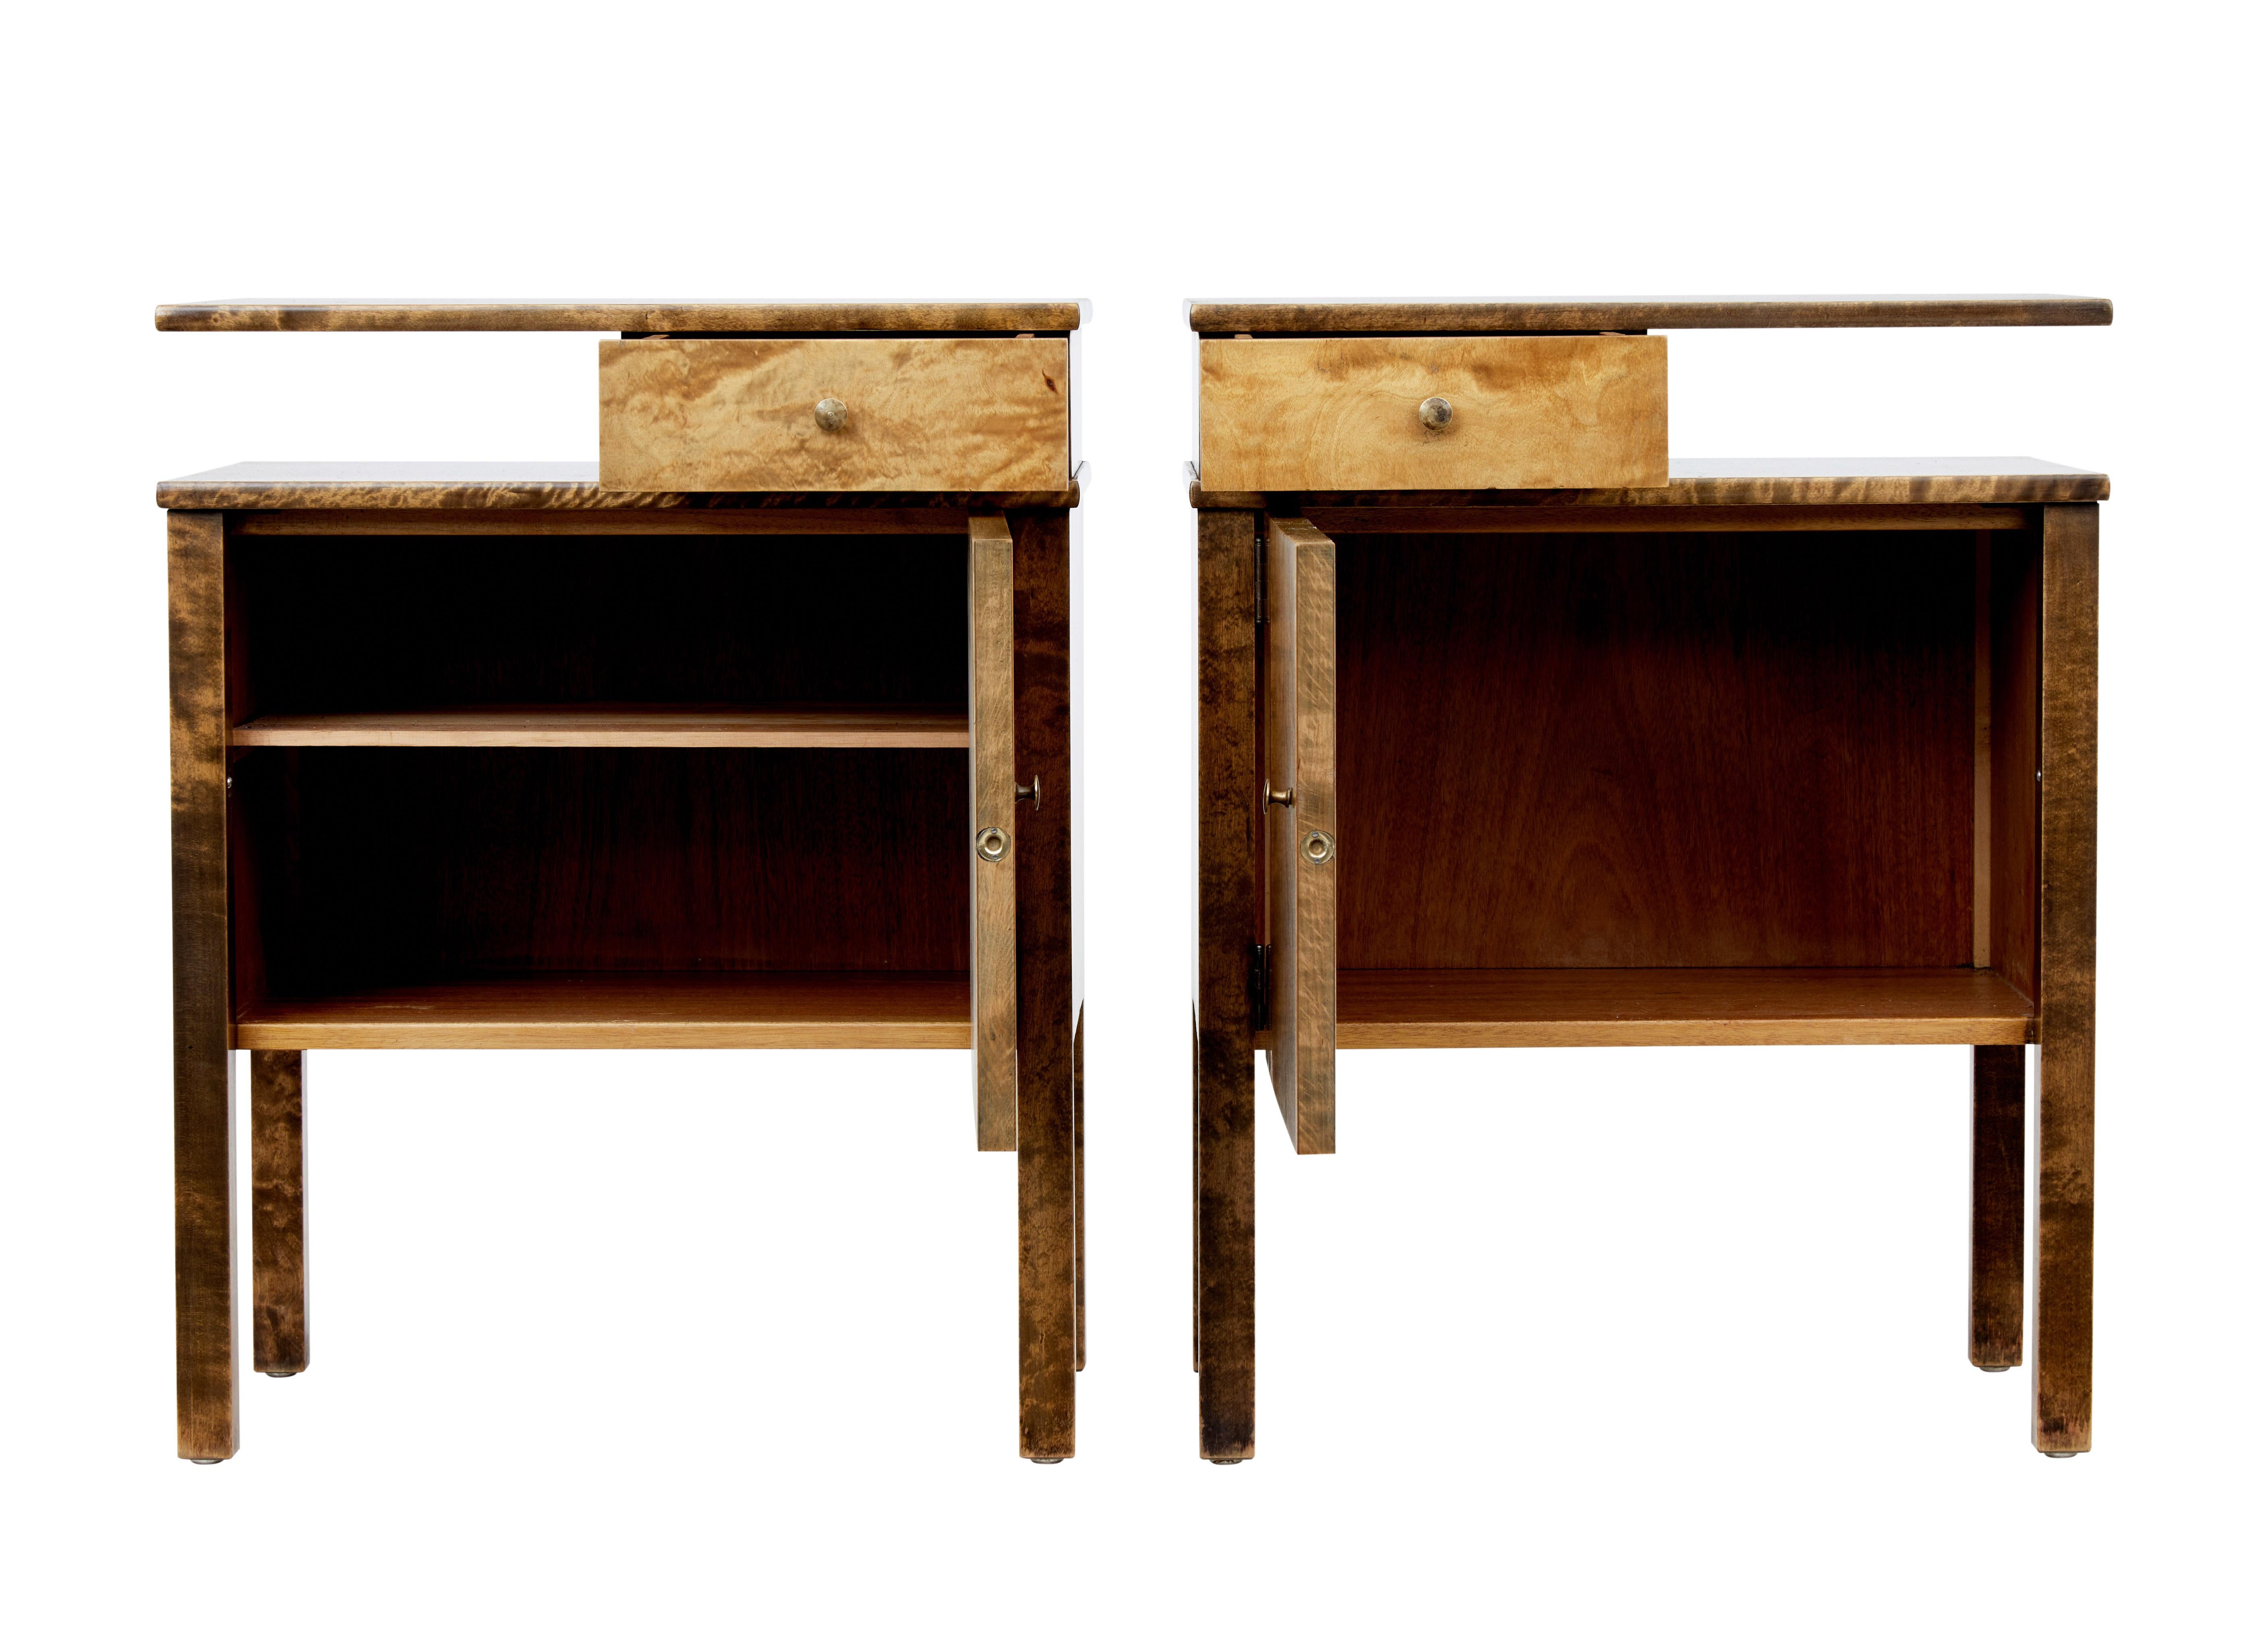 Pair of bedside tables in the deco taste circa 1950.

Floating top surface with small drawer below, with open space for storage. Single door cupboard with matched veneers to the front, 1 cupboard containing a shelf.

Made with contrasting dark